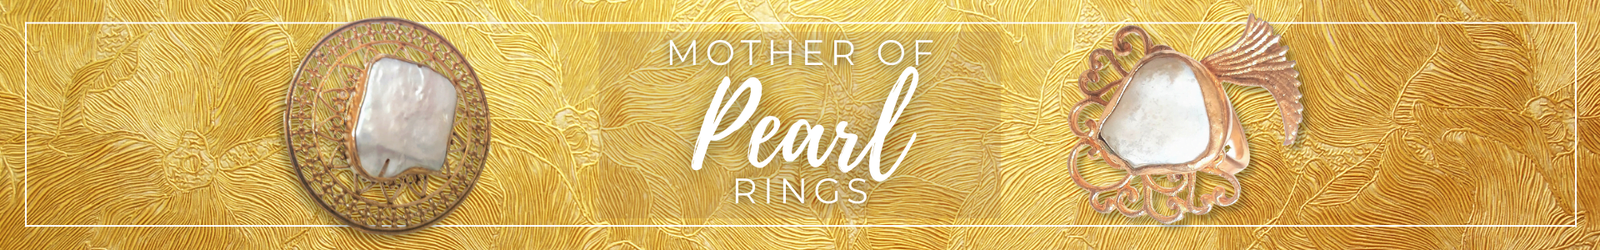 Mother of Pearl Rings banner